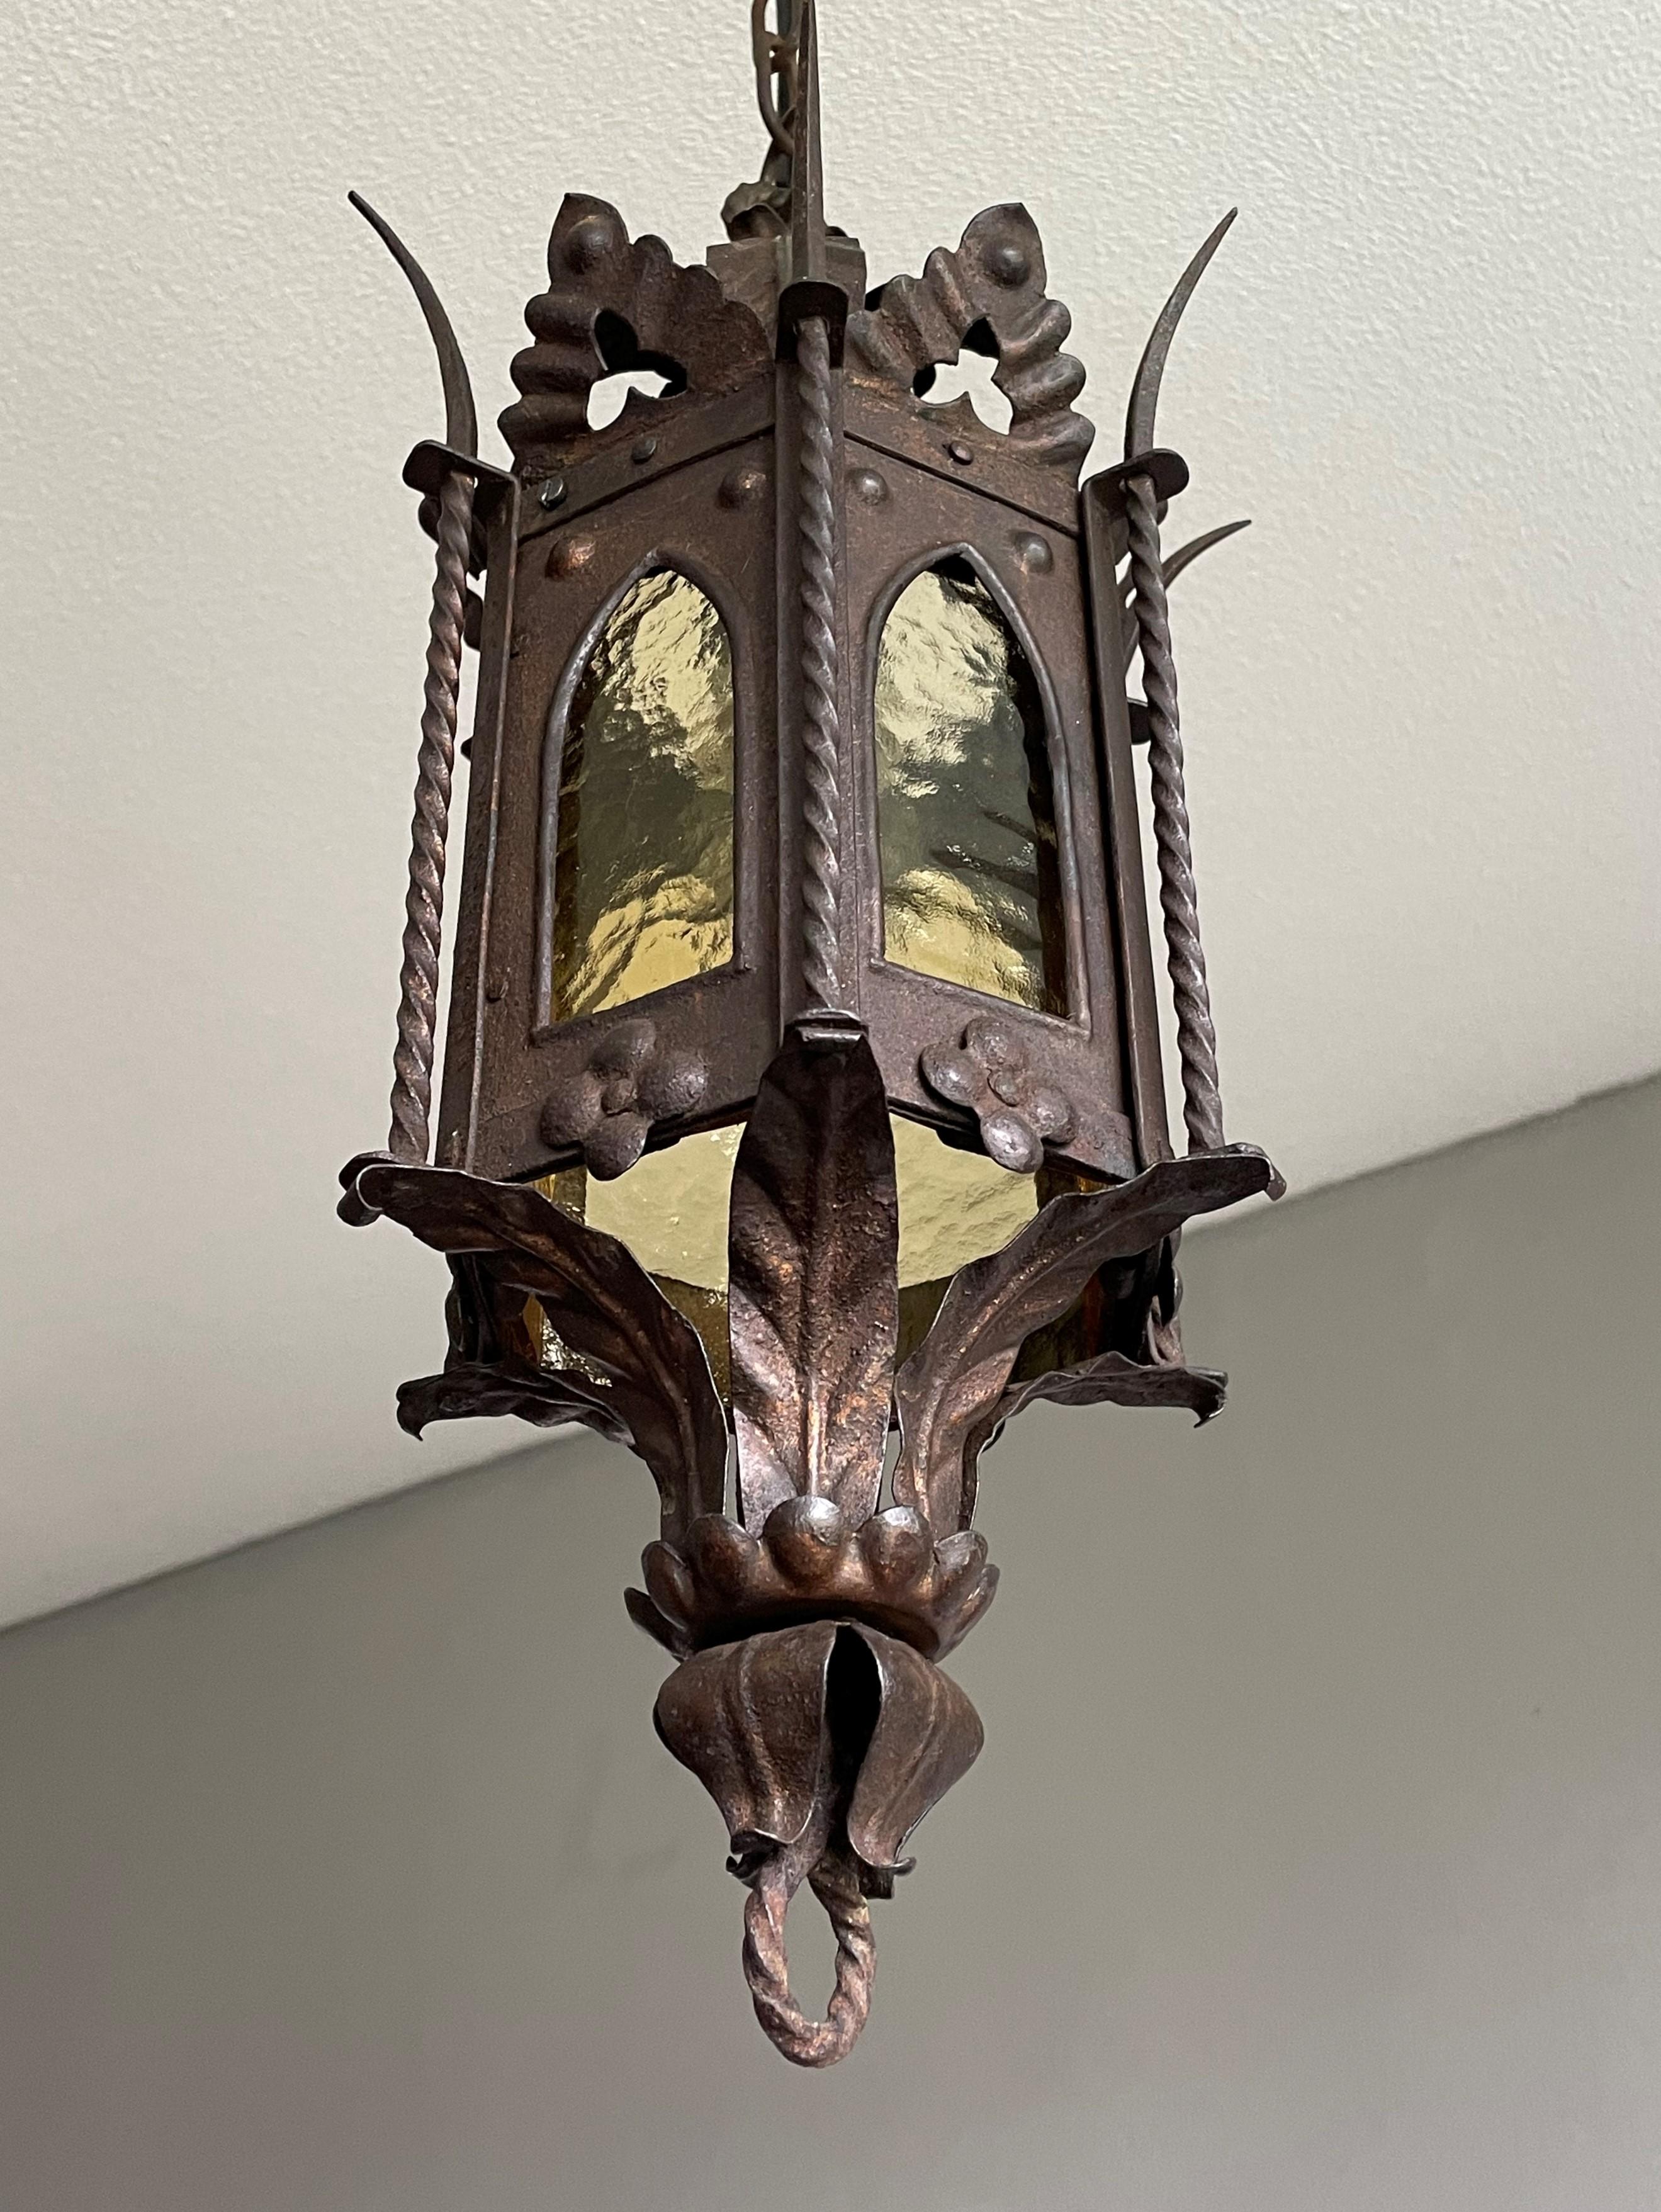 Hammered Gothic Revival Medieval Style, Small Size Wrought Iron & Cathedral Glass Lantern For Sale